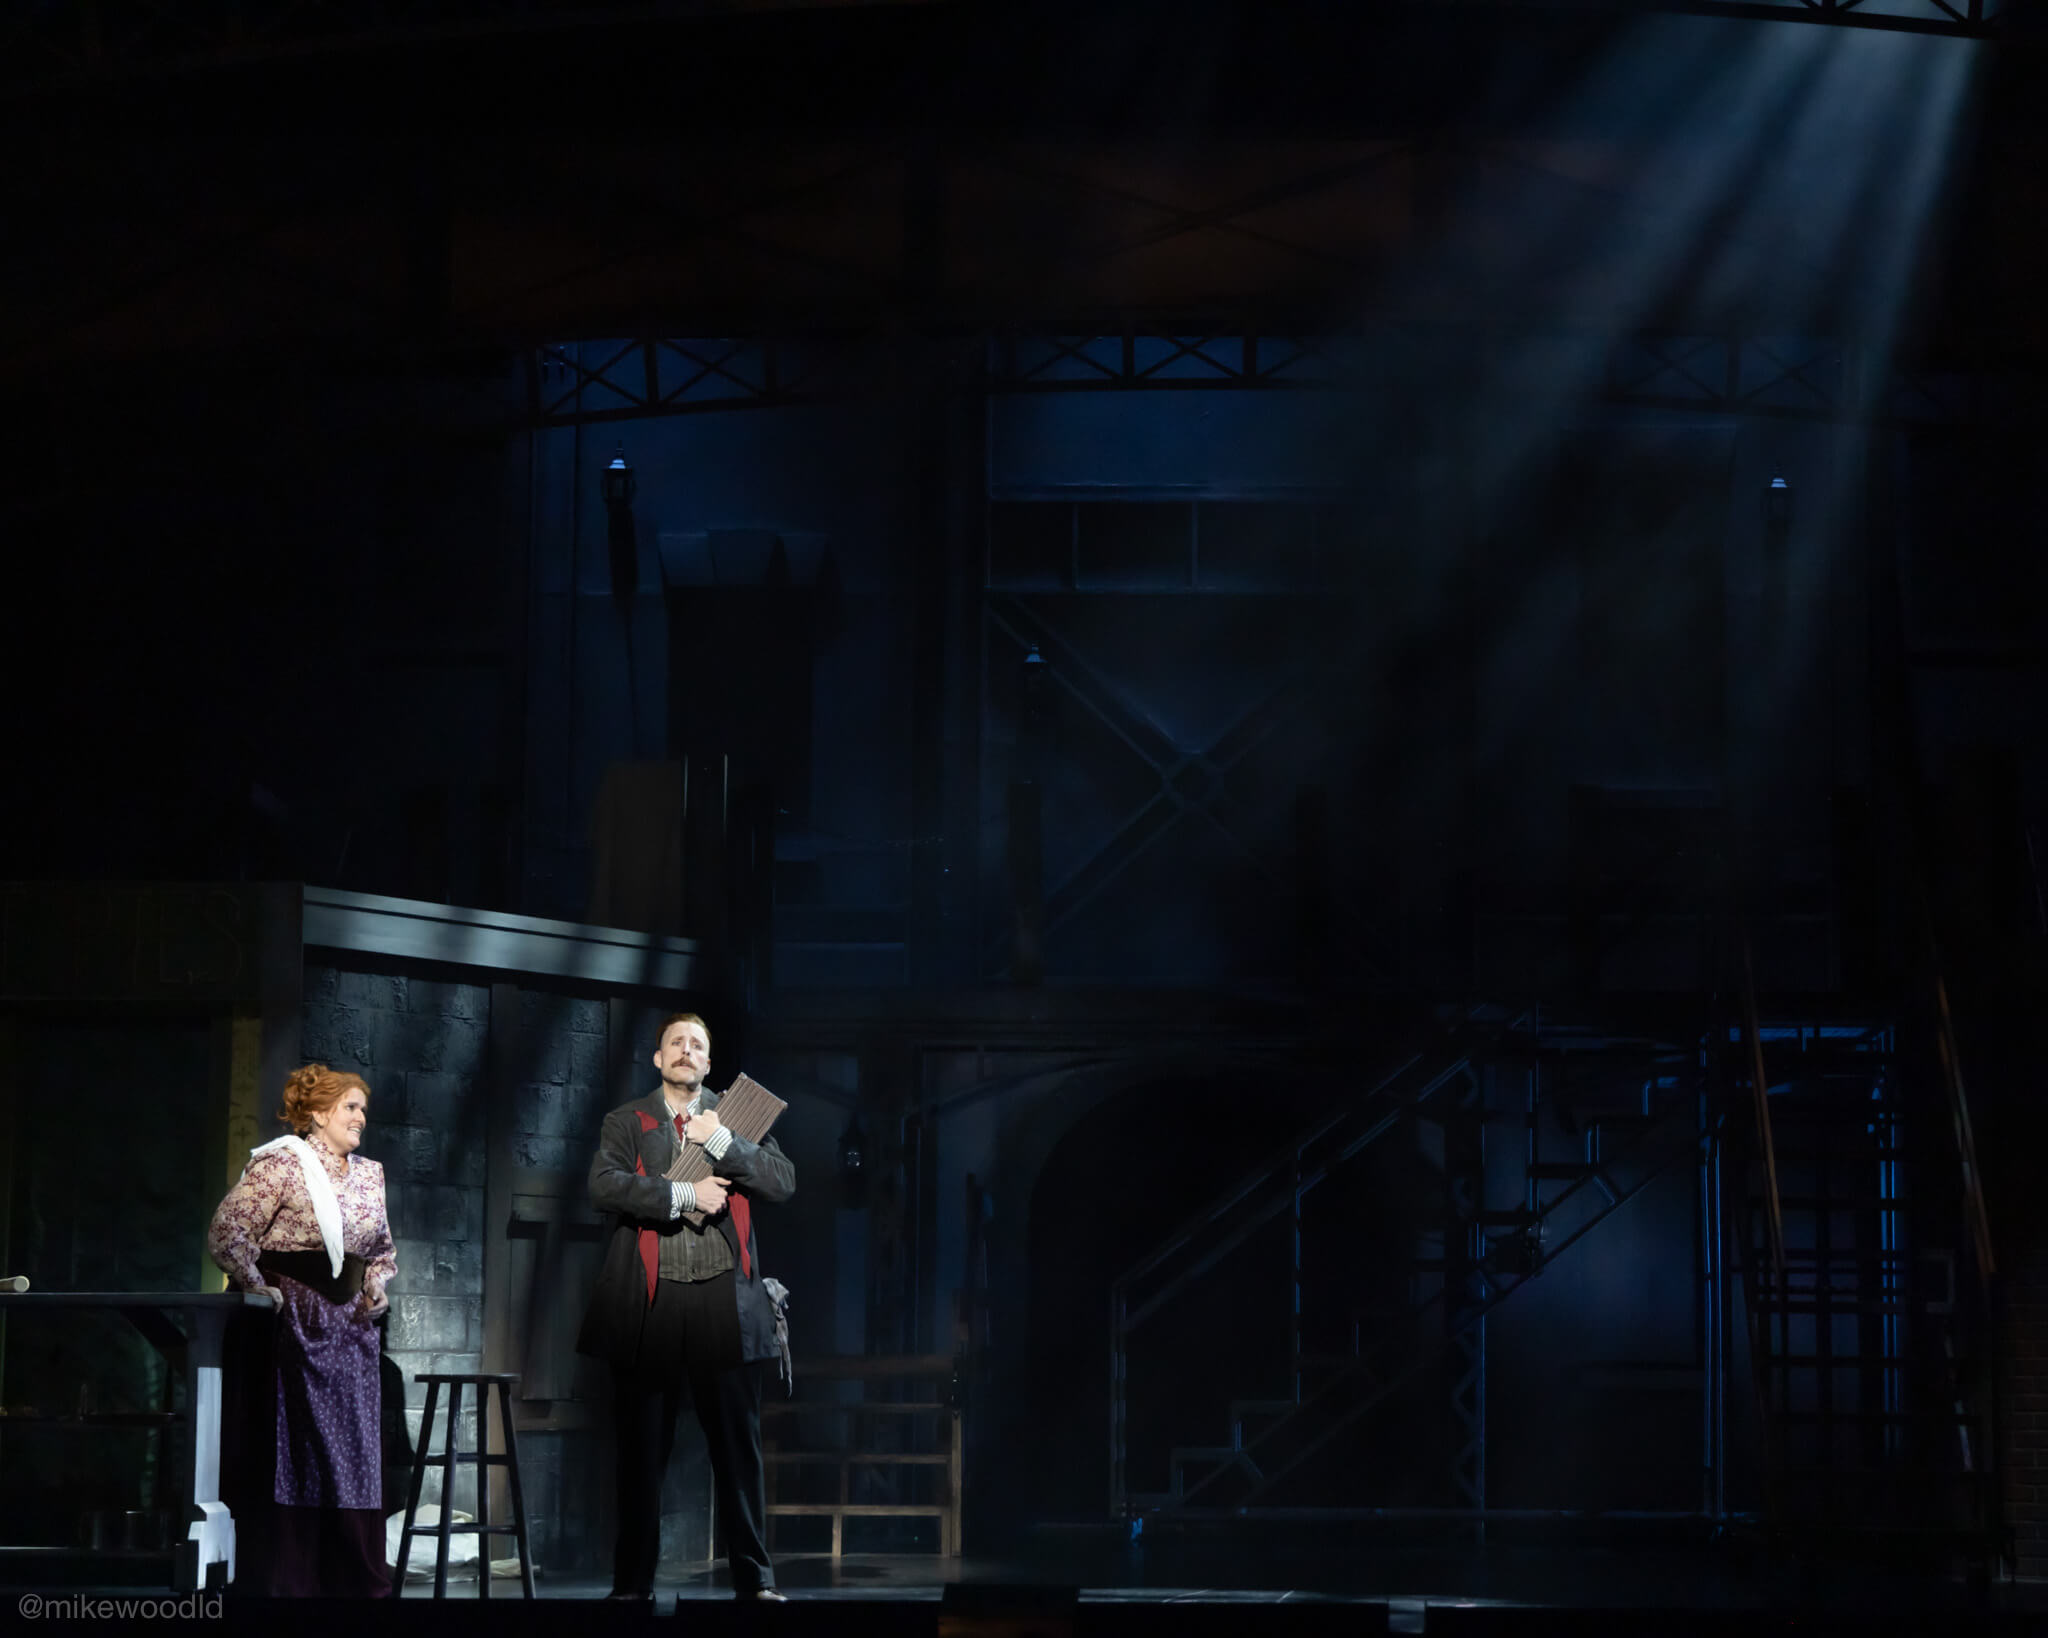 Sweeney Todd musical scenery rental - Unit Set - Front Row Theatrical Rental